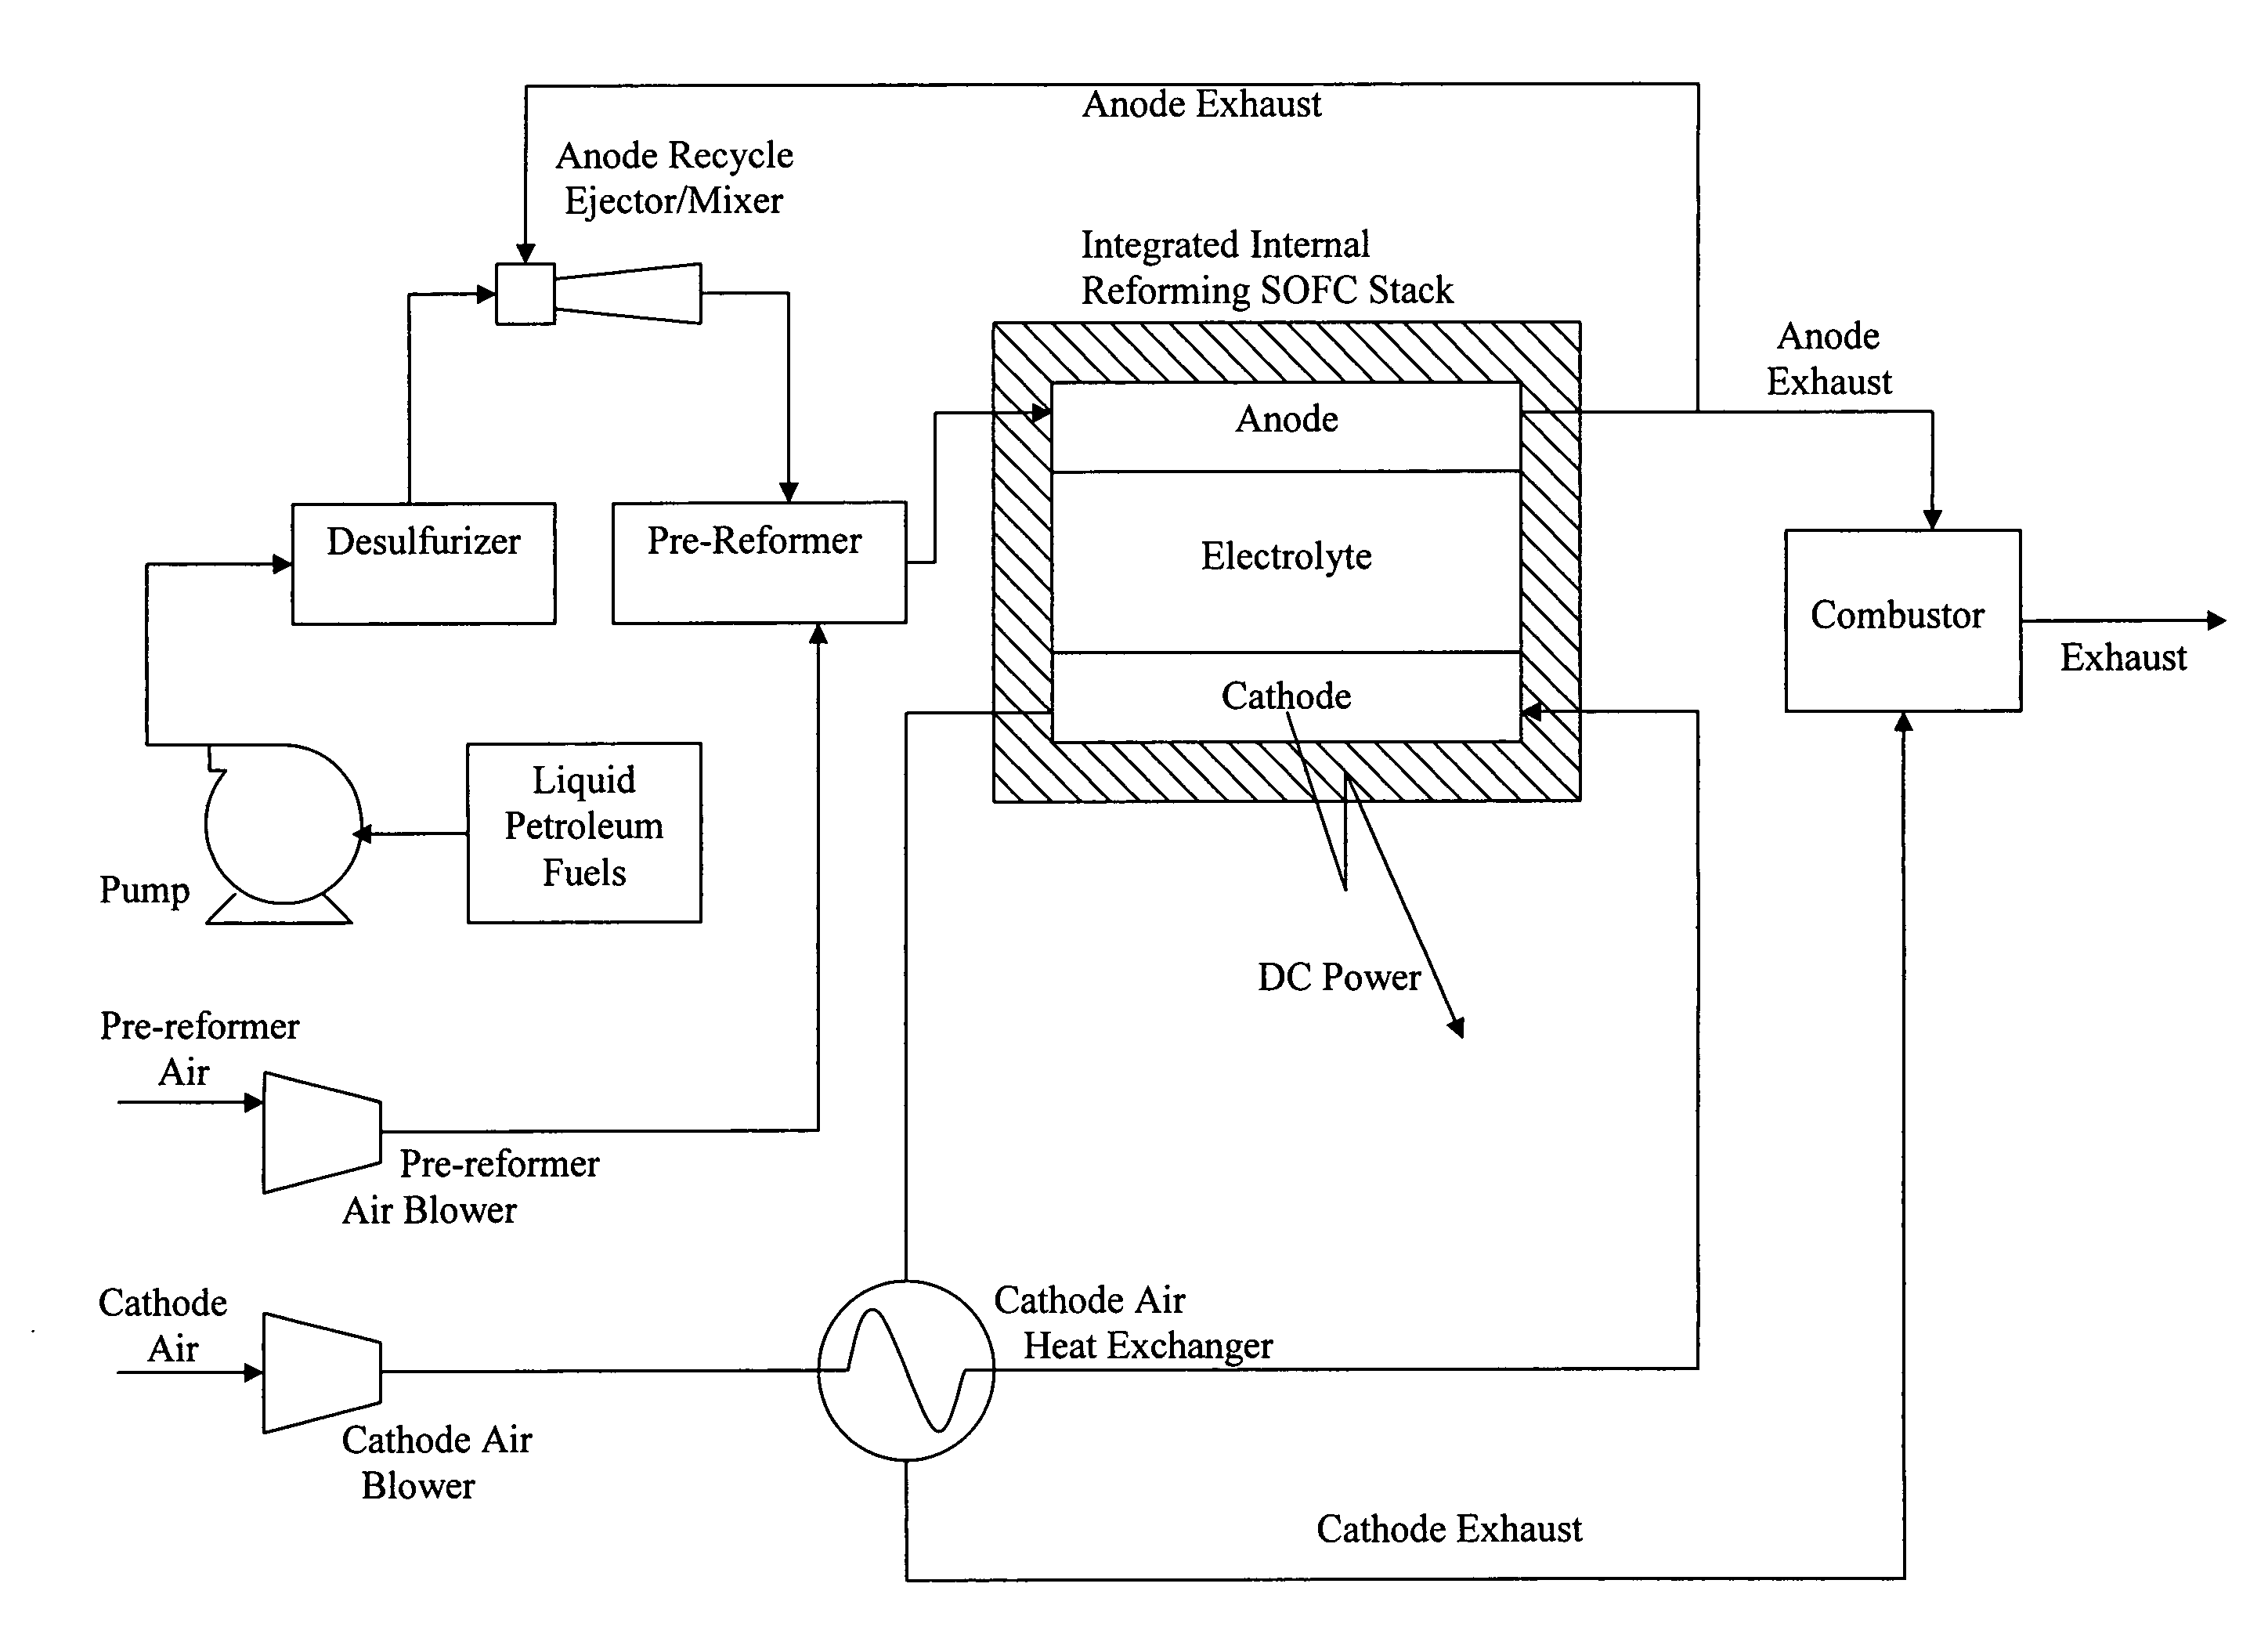 Process for the conversion of oil-based liquid fuels to a fuel mixture suitable for use in solid oxide fuel cell applications